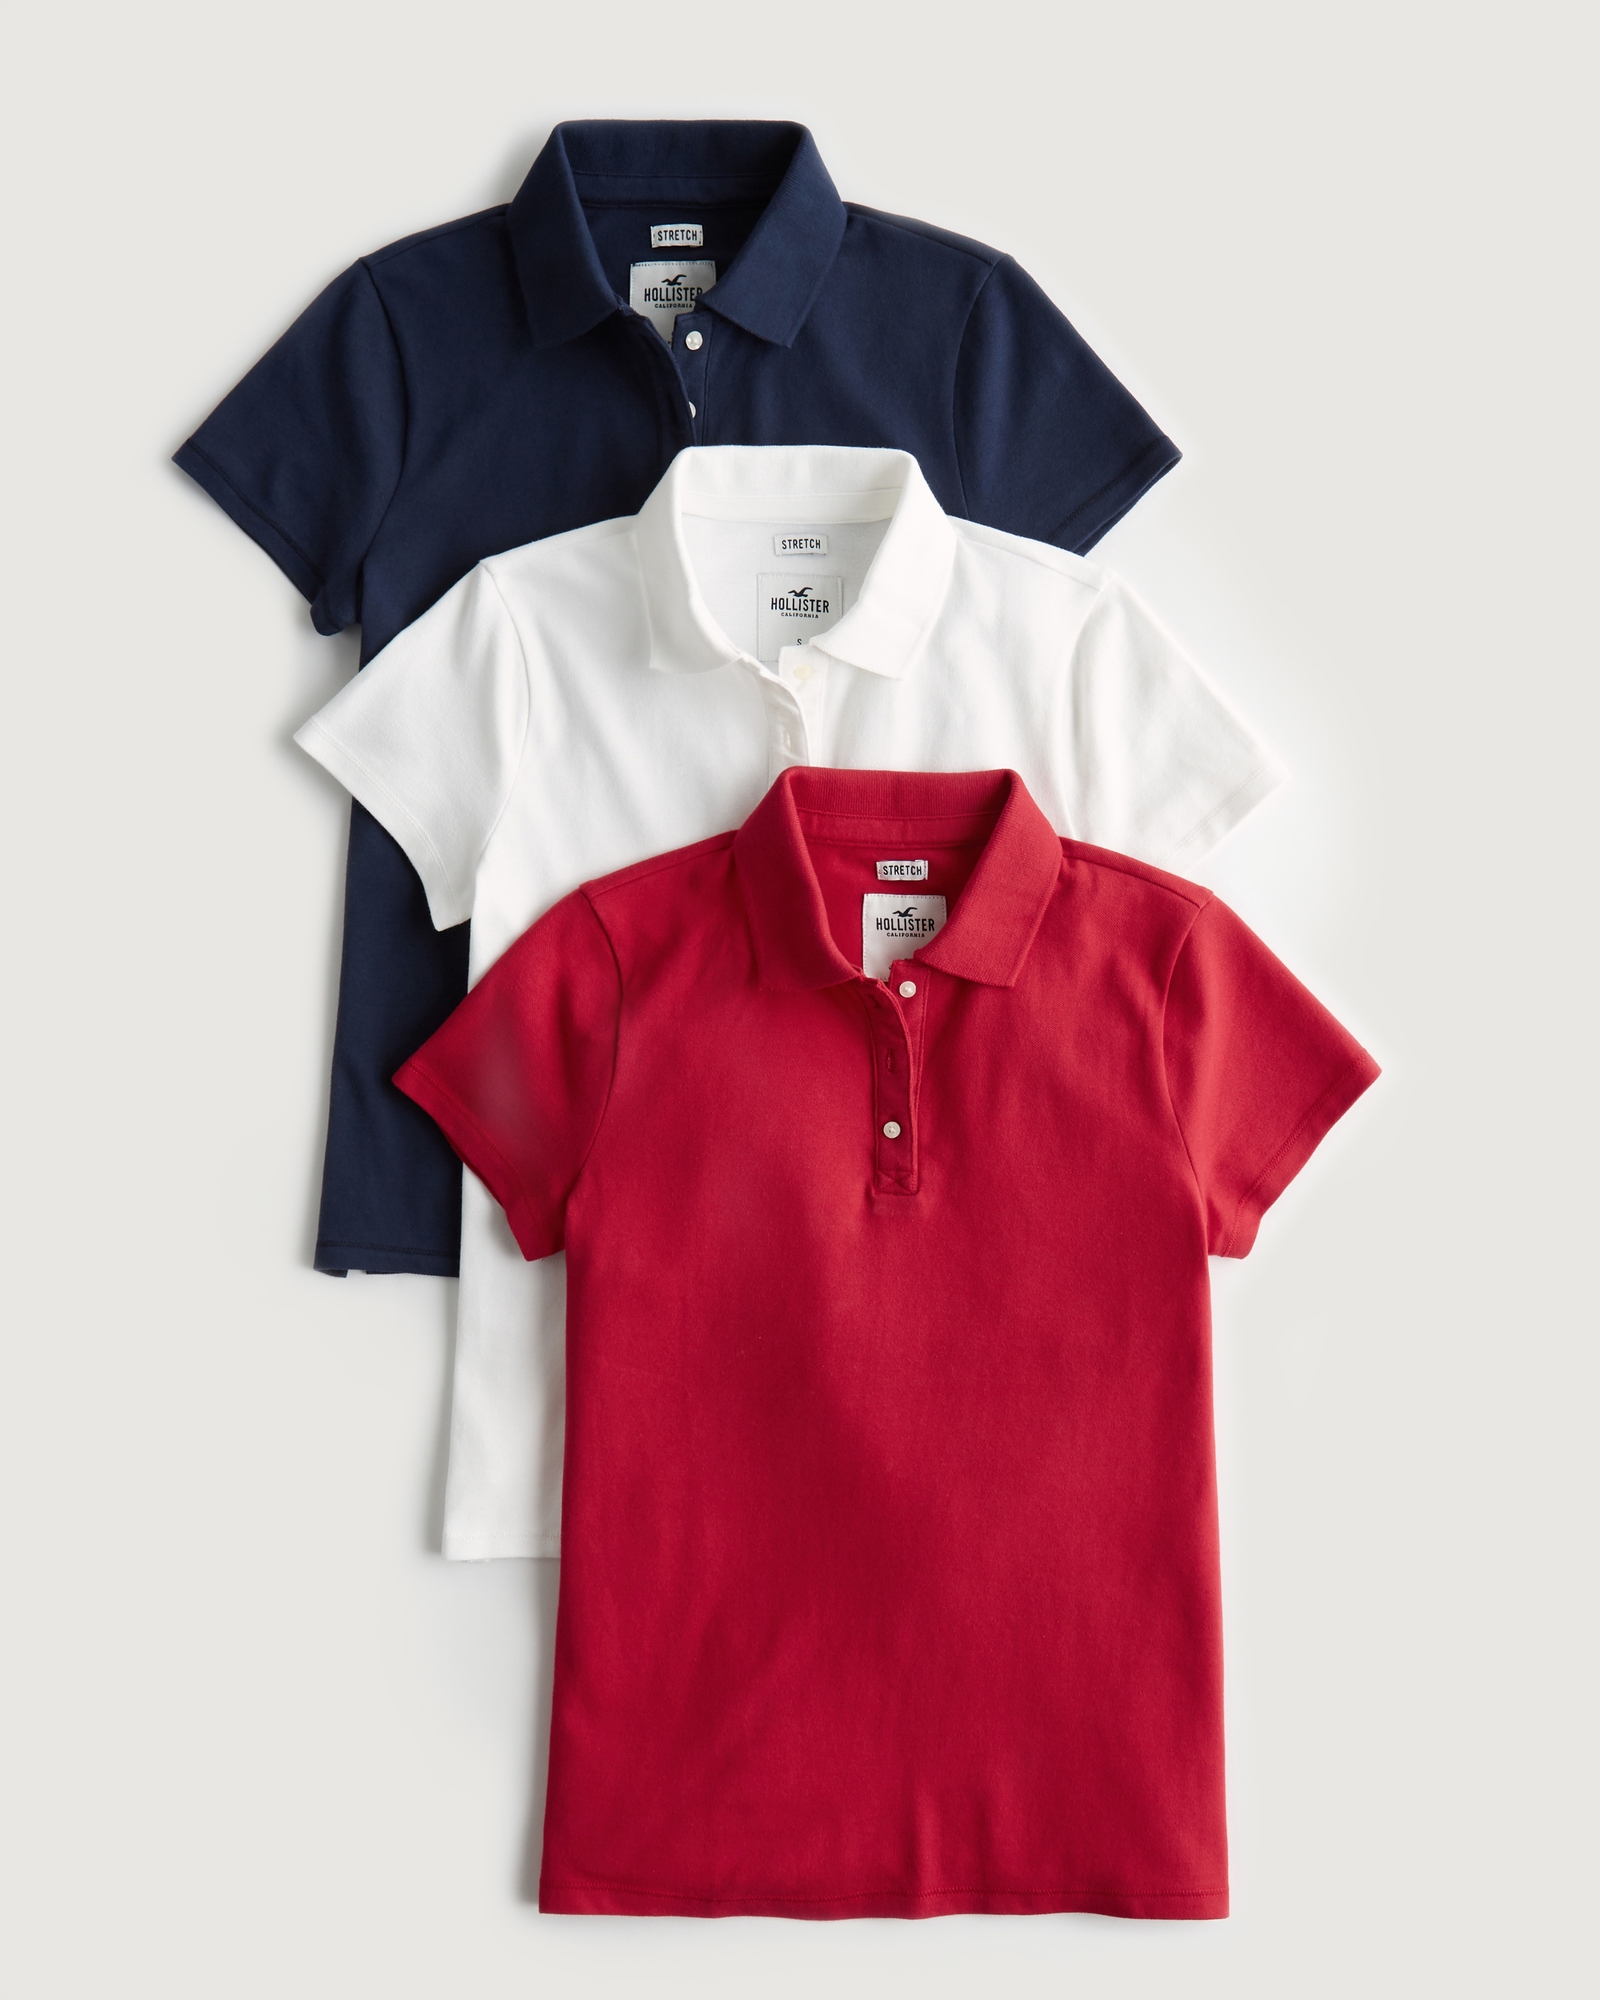 Hollister Men's Polo S Red Cotton with Elastane